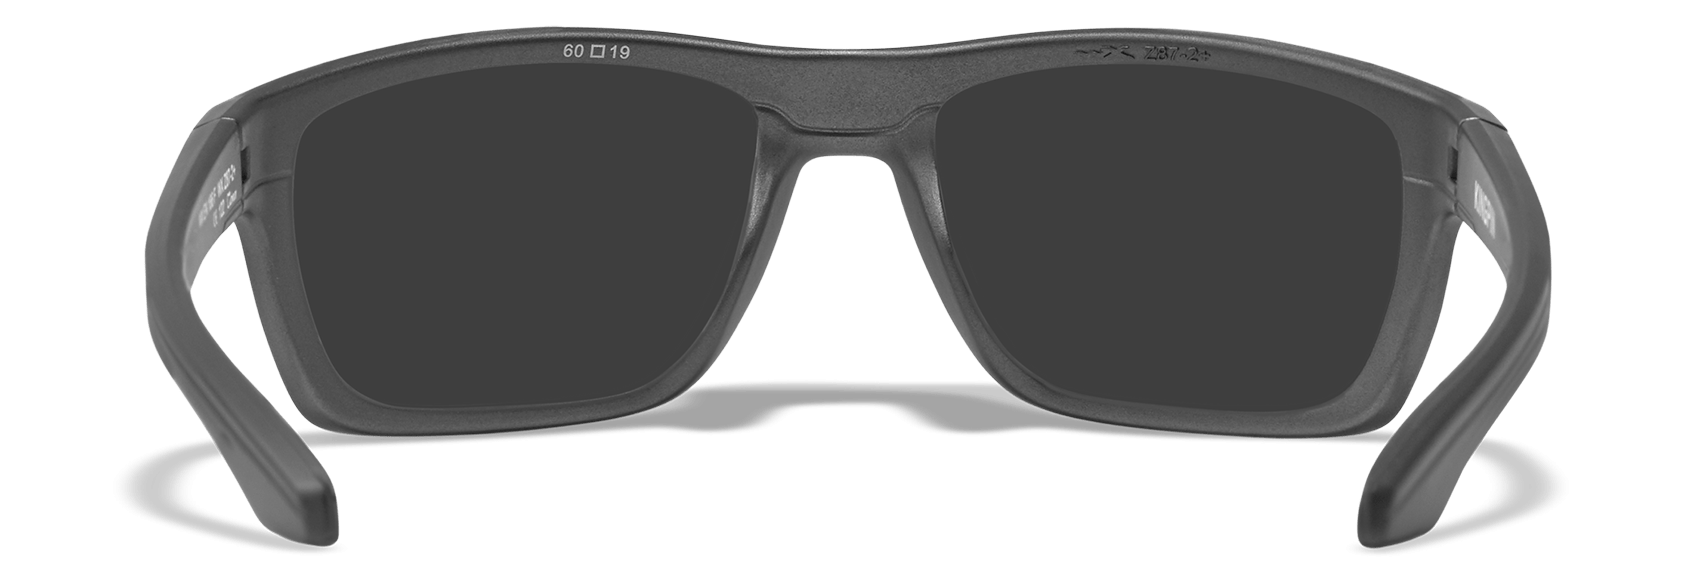 Wiley X Kingpin Sunglasses with Matte Graphite Frame and Polarized Blue Mirror Lens Inside Lens View